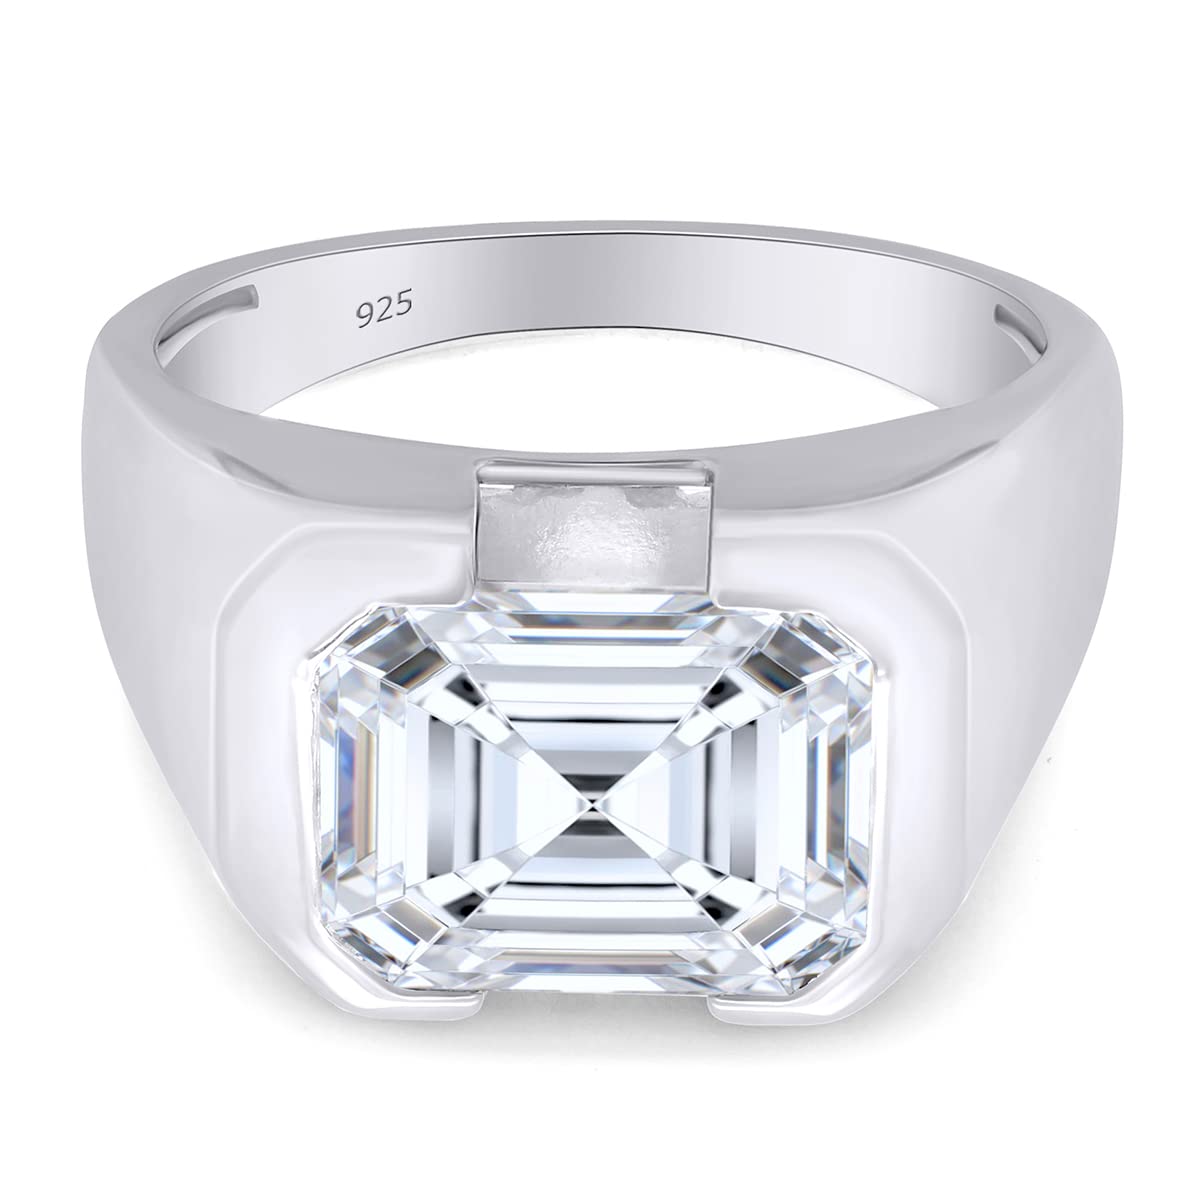 3.50 Cttw Emerald Cut Lab Created Moissanite Diamond Solitaire Signet Engagement Ring In 925 Sterling Silver For Men